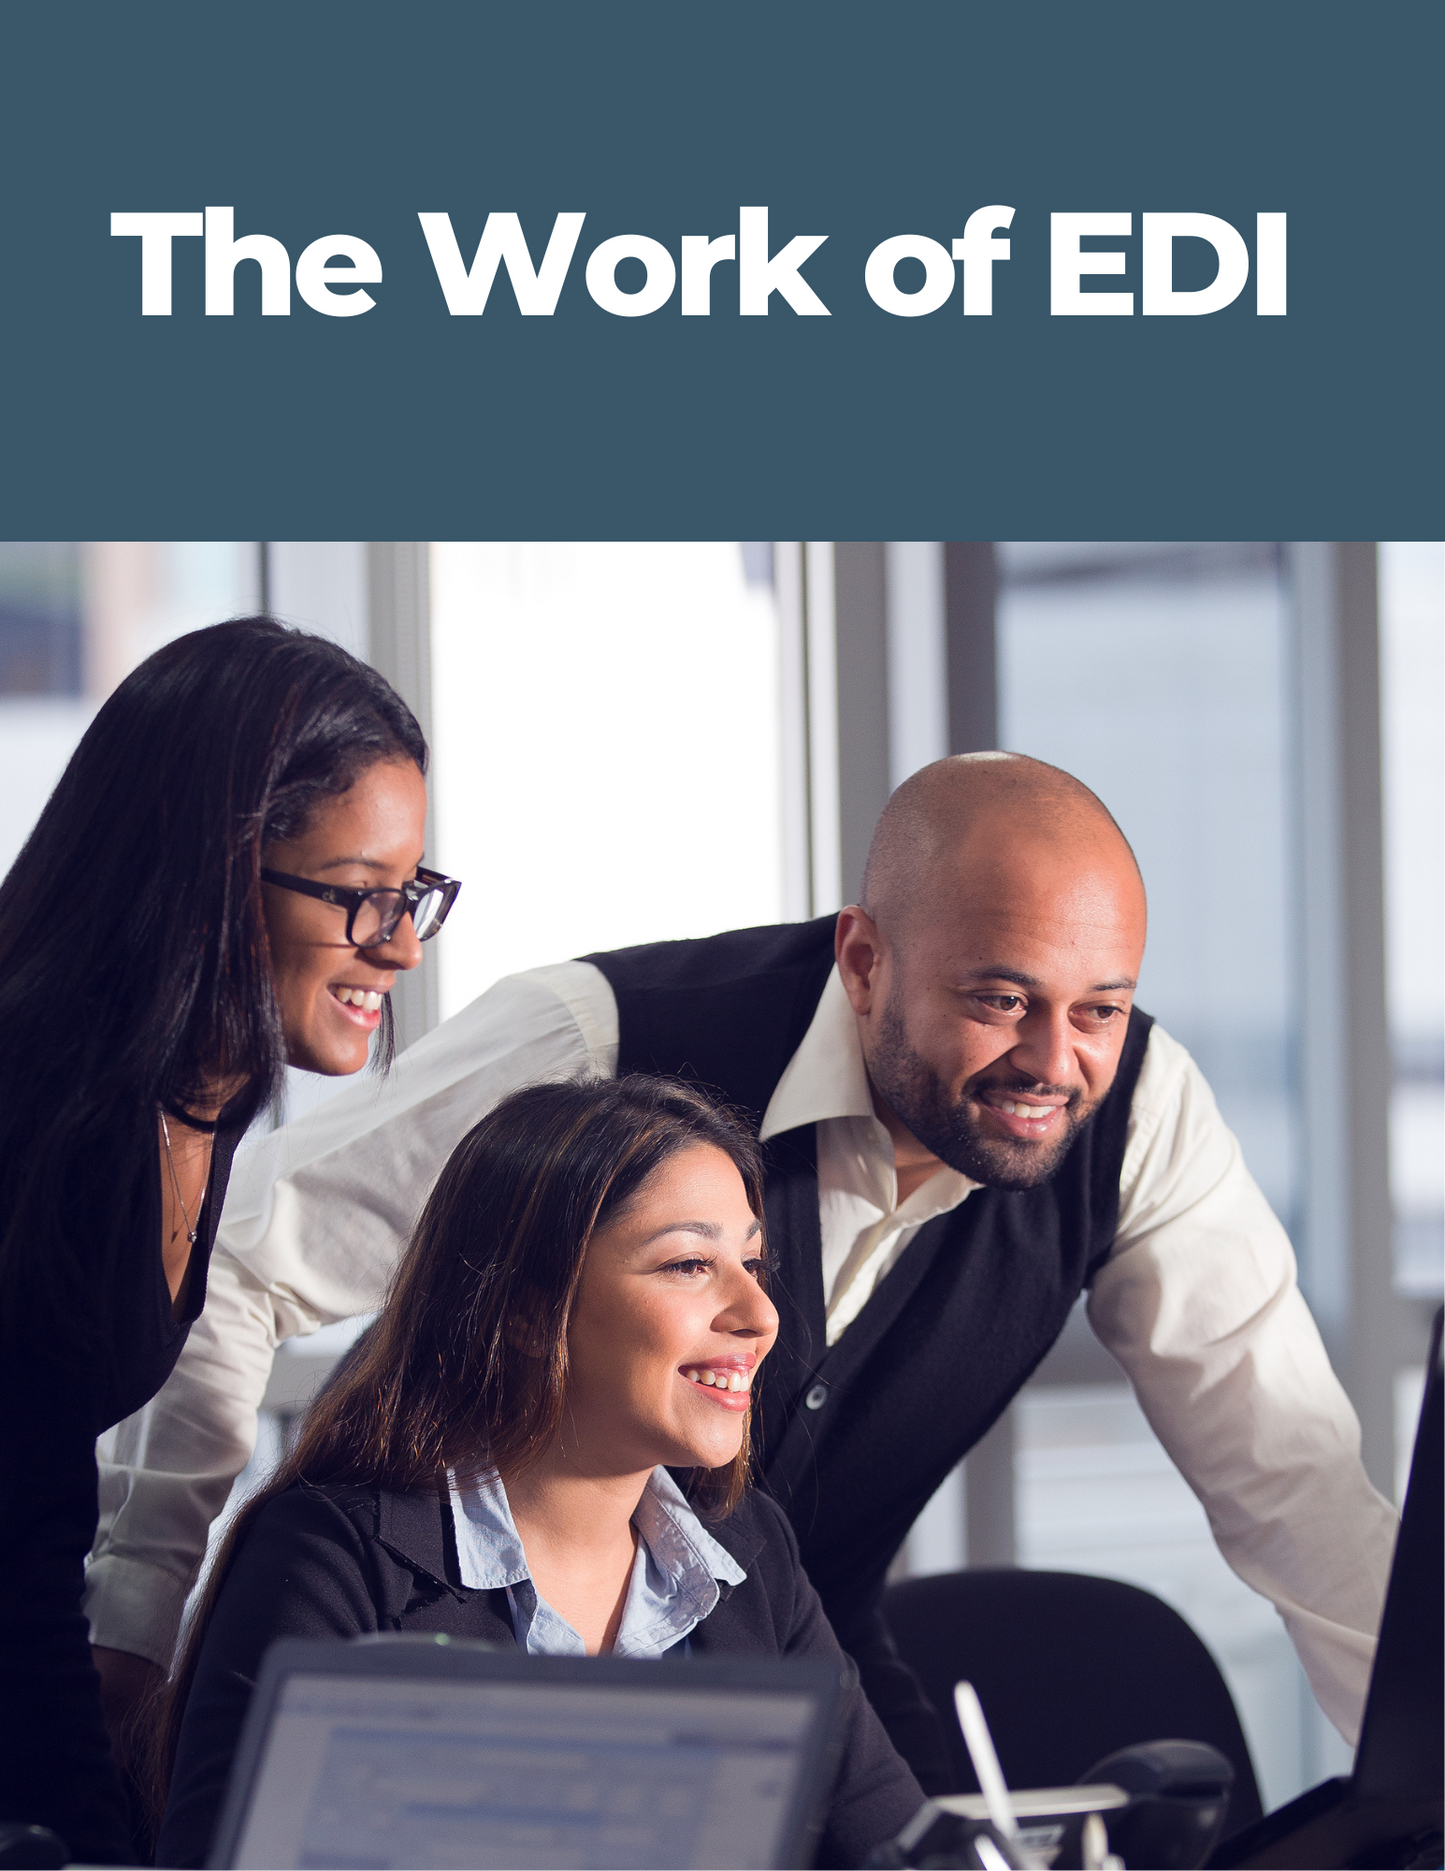 The Work of EDI: Inclusion in the Workplace